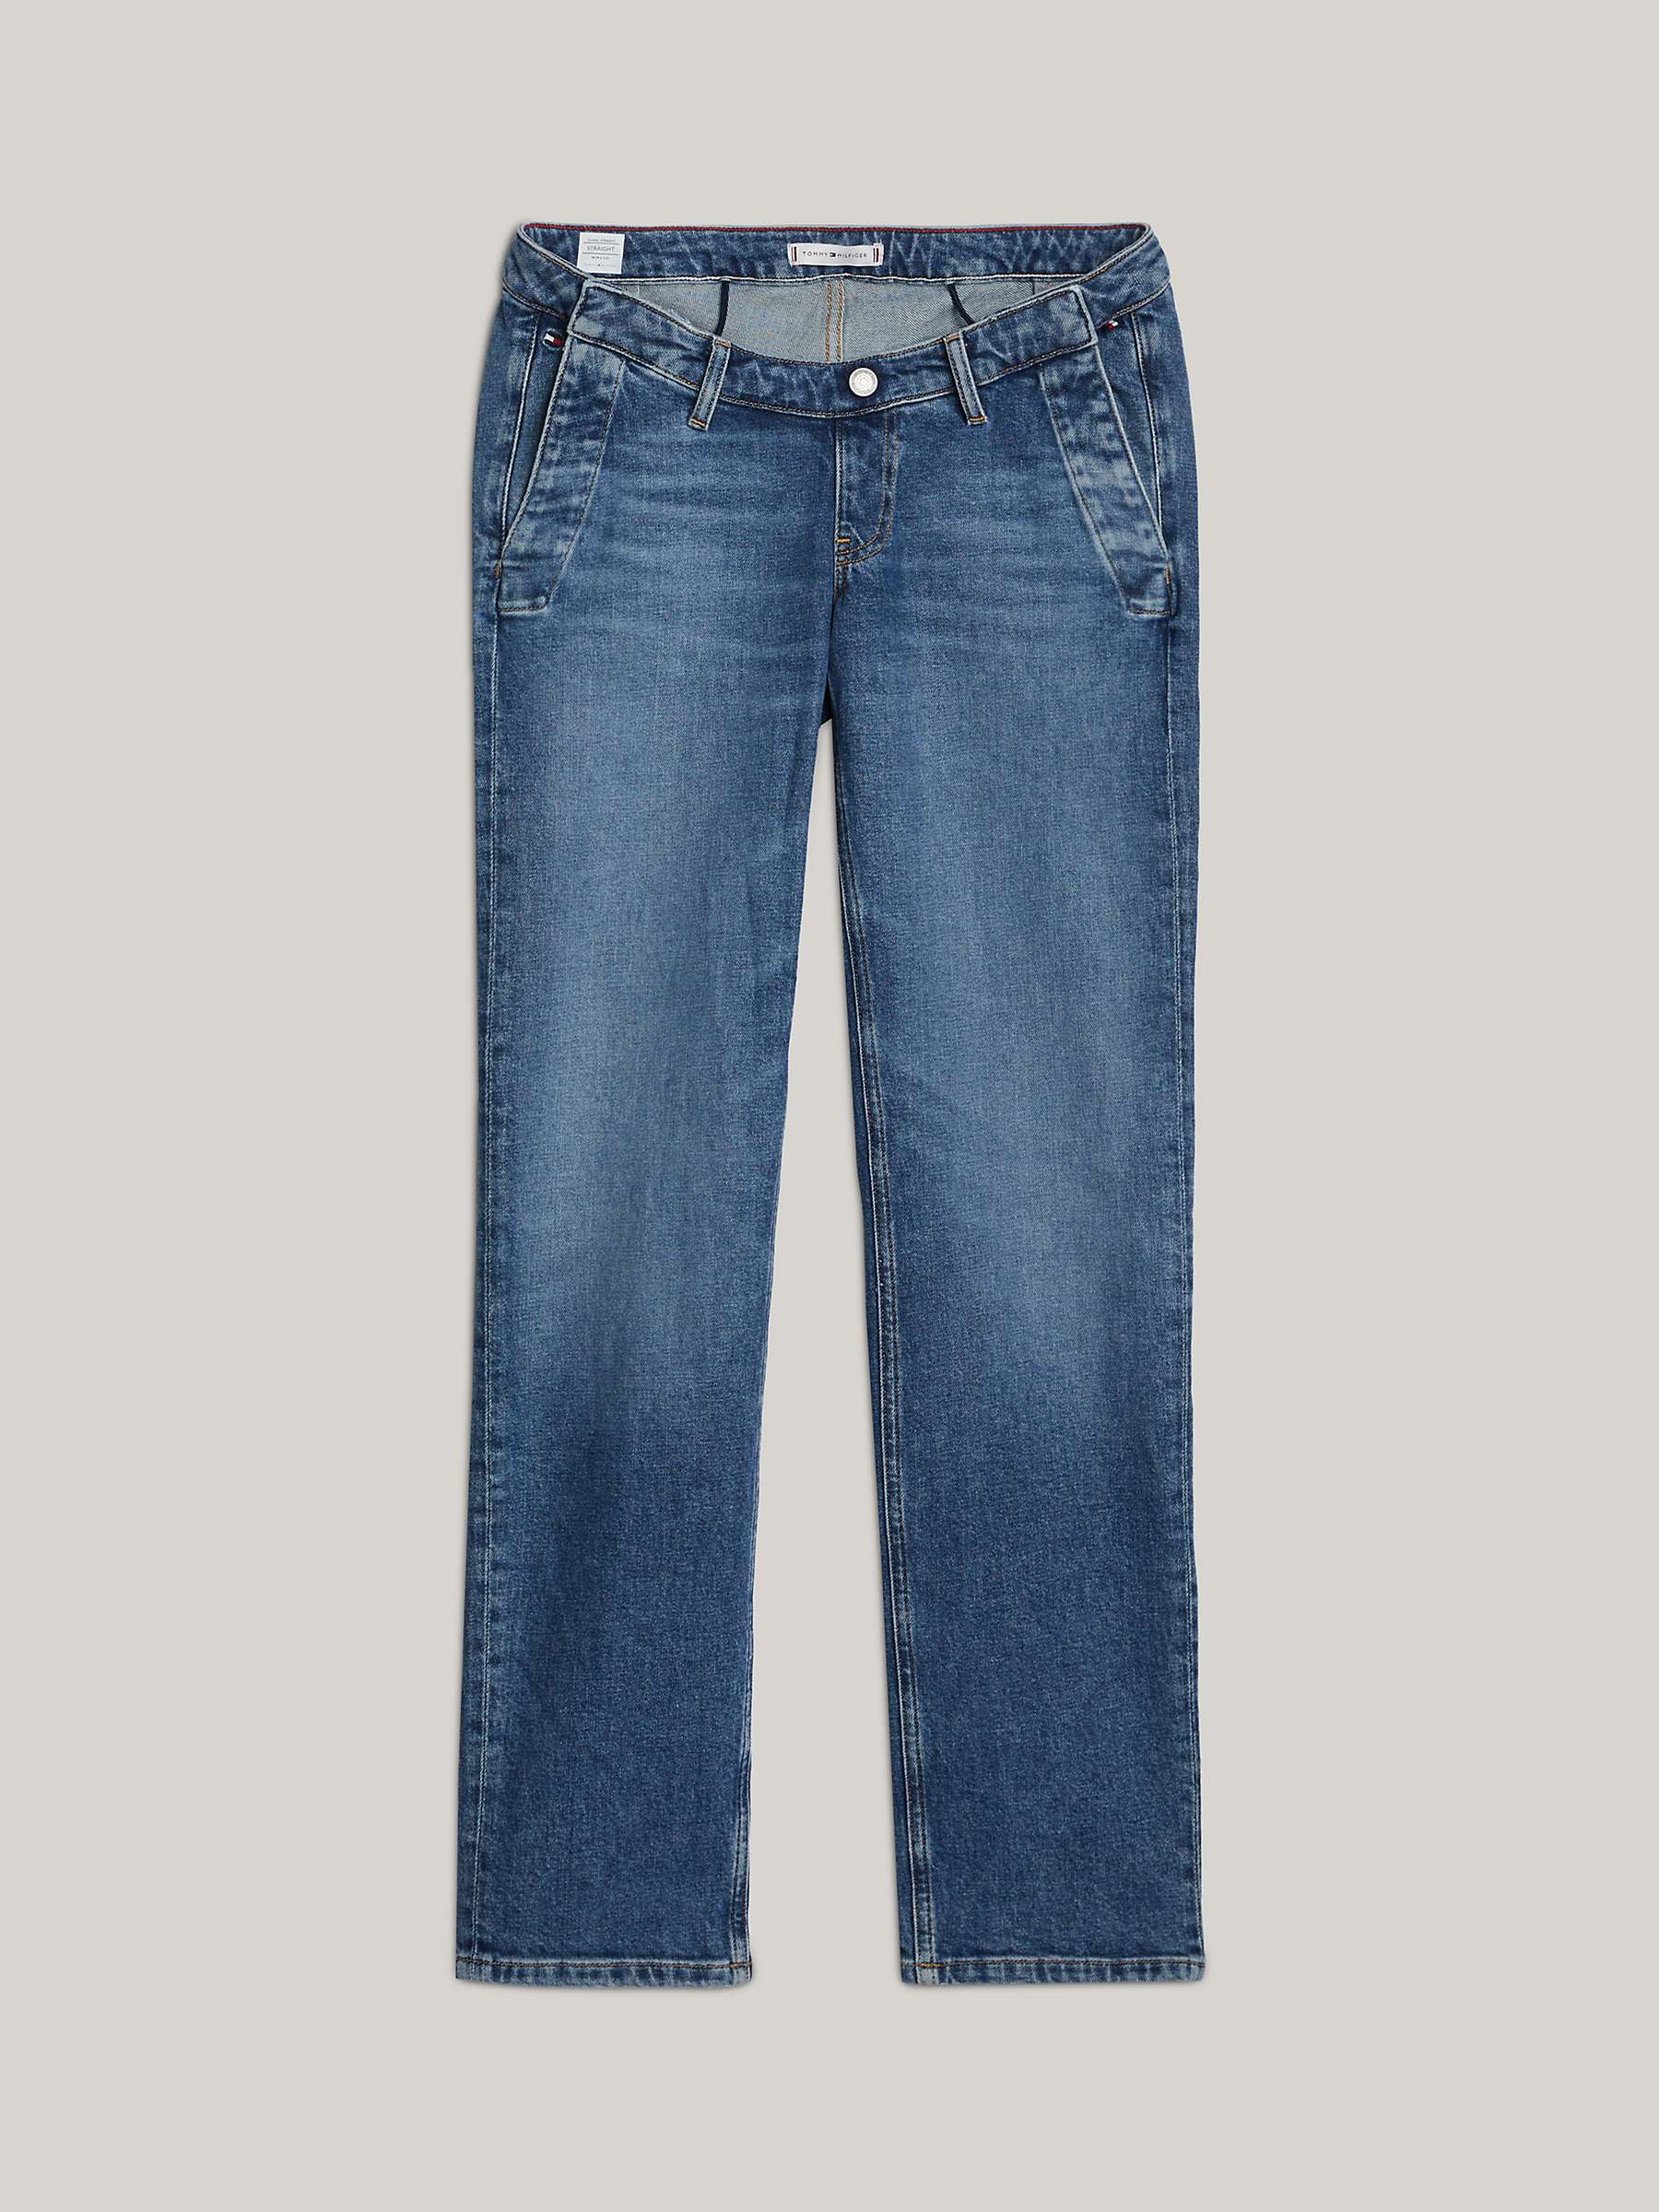 Buy Tommy Hilfiger Adaptive Classic Straight Leg Jeans, Blue Online at johnlewis.com